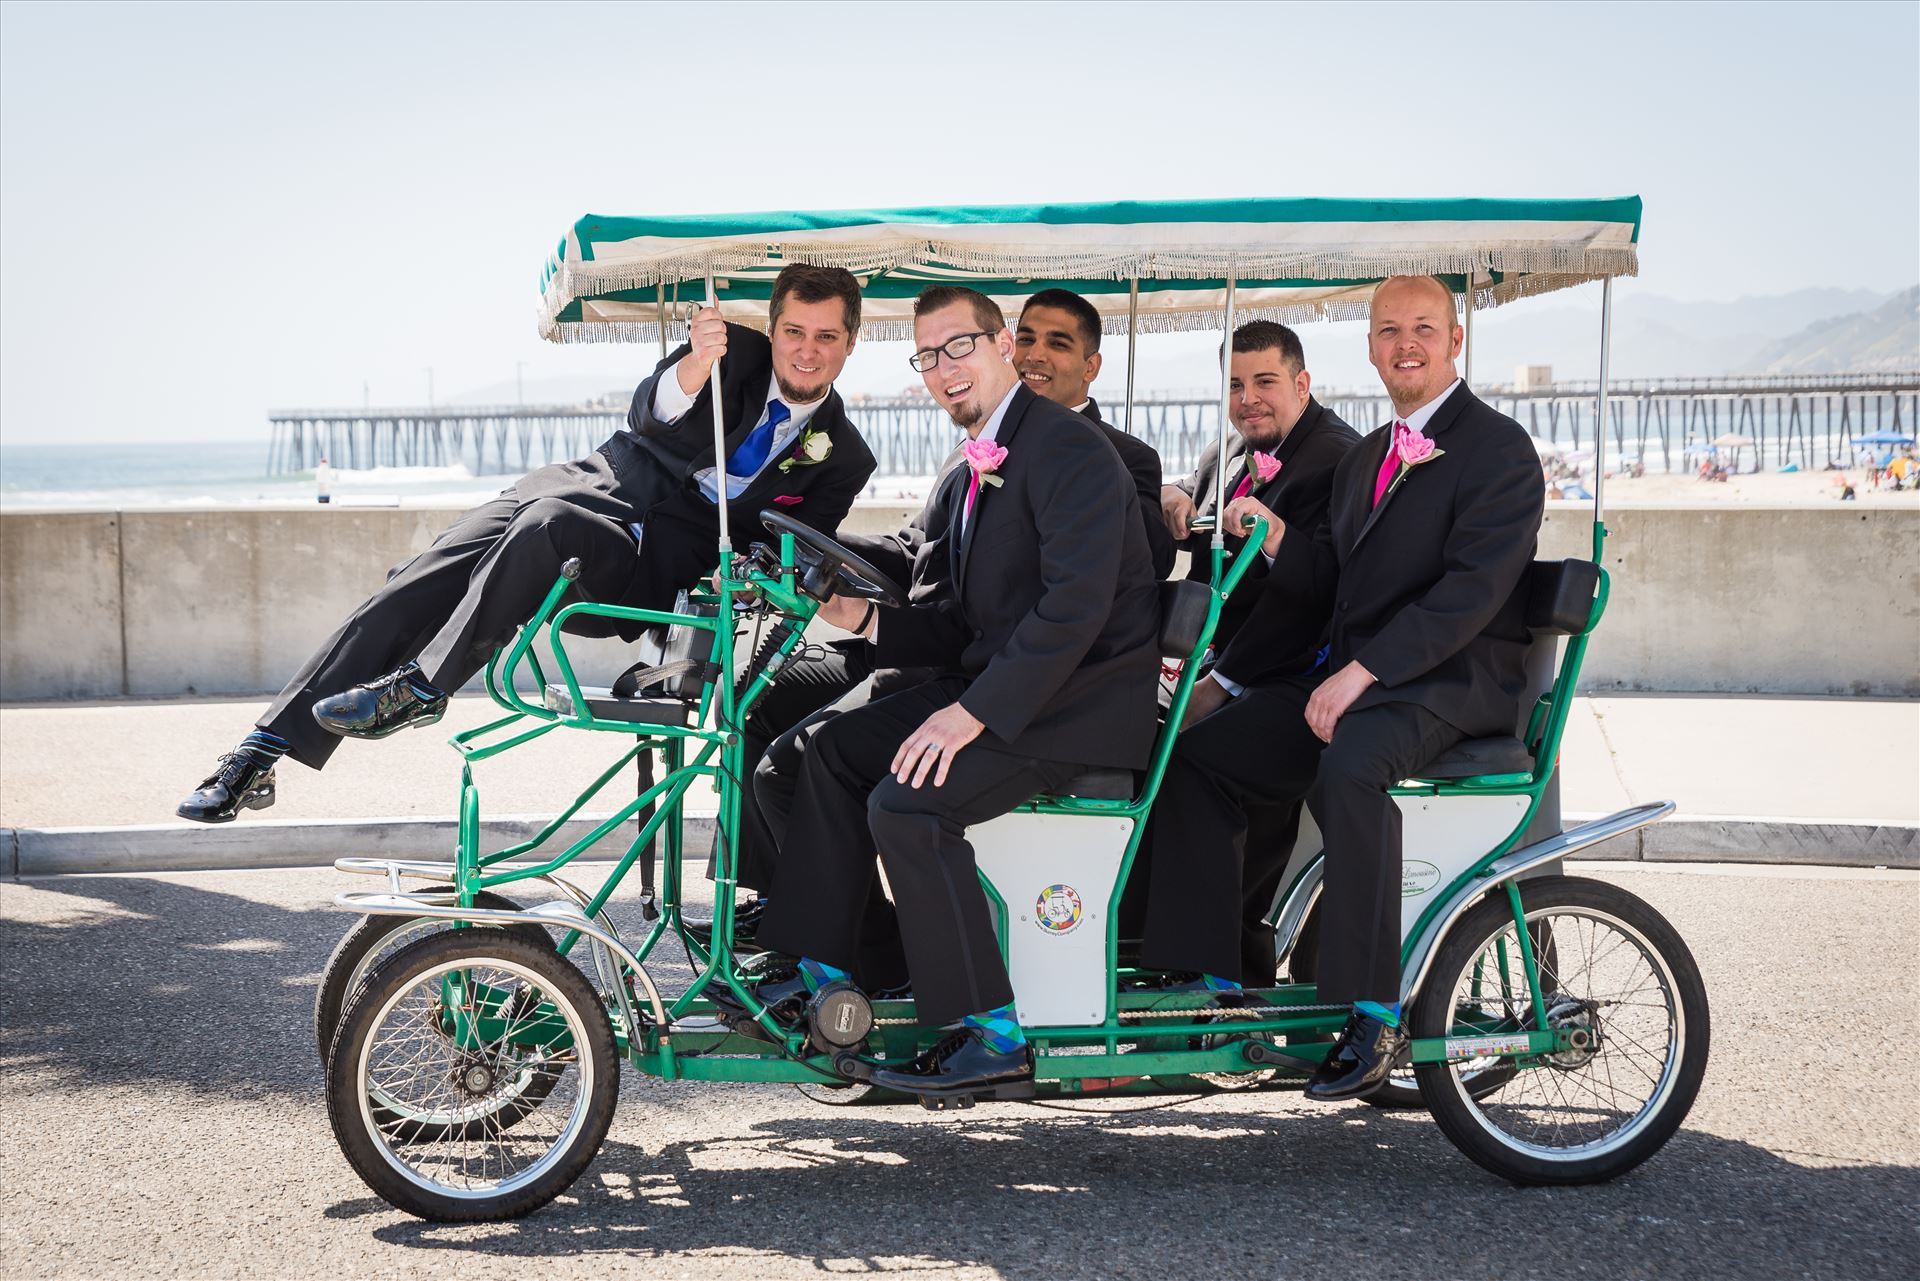 Jessica and Michael 23 - Sea Venture Resort and Spa Wedding Photography by Mirror's Edge Photography in Pismo Beach, California. Groom and Groomsmen in cart by Sarah Williams